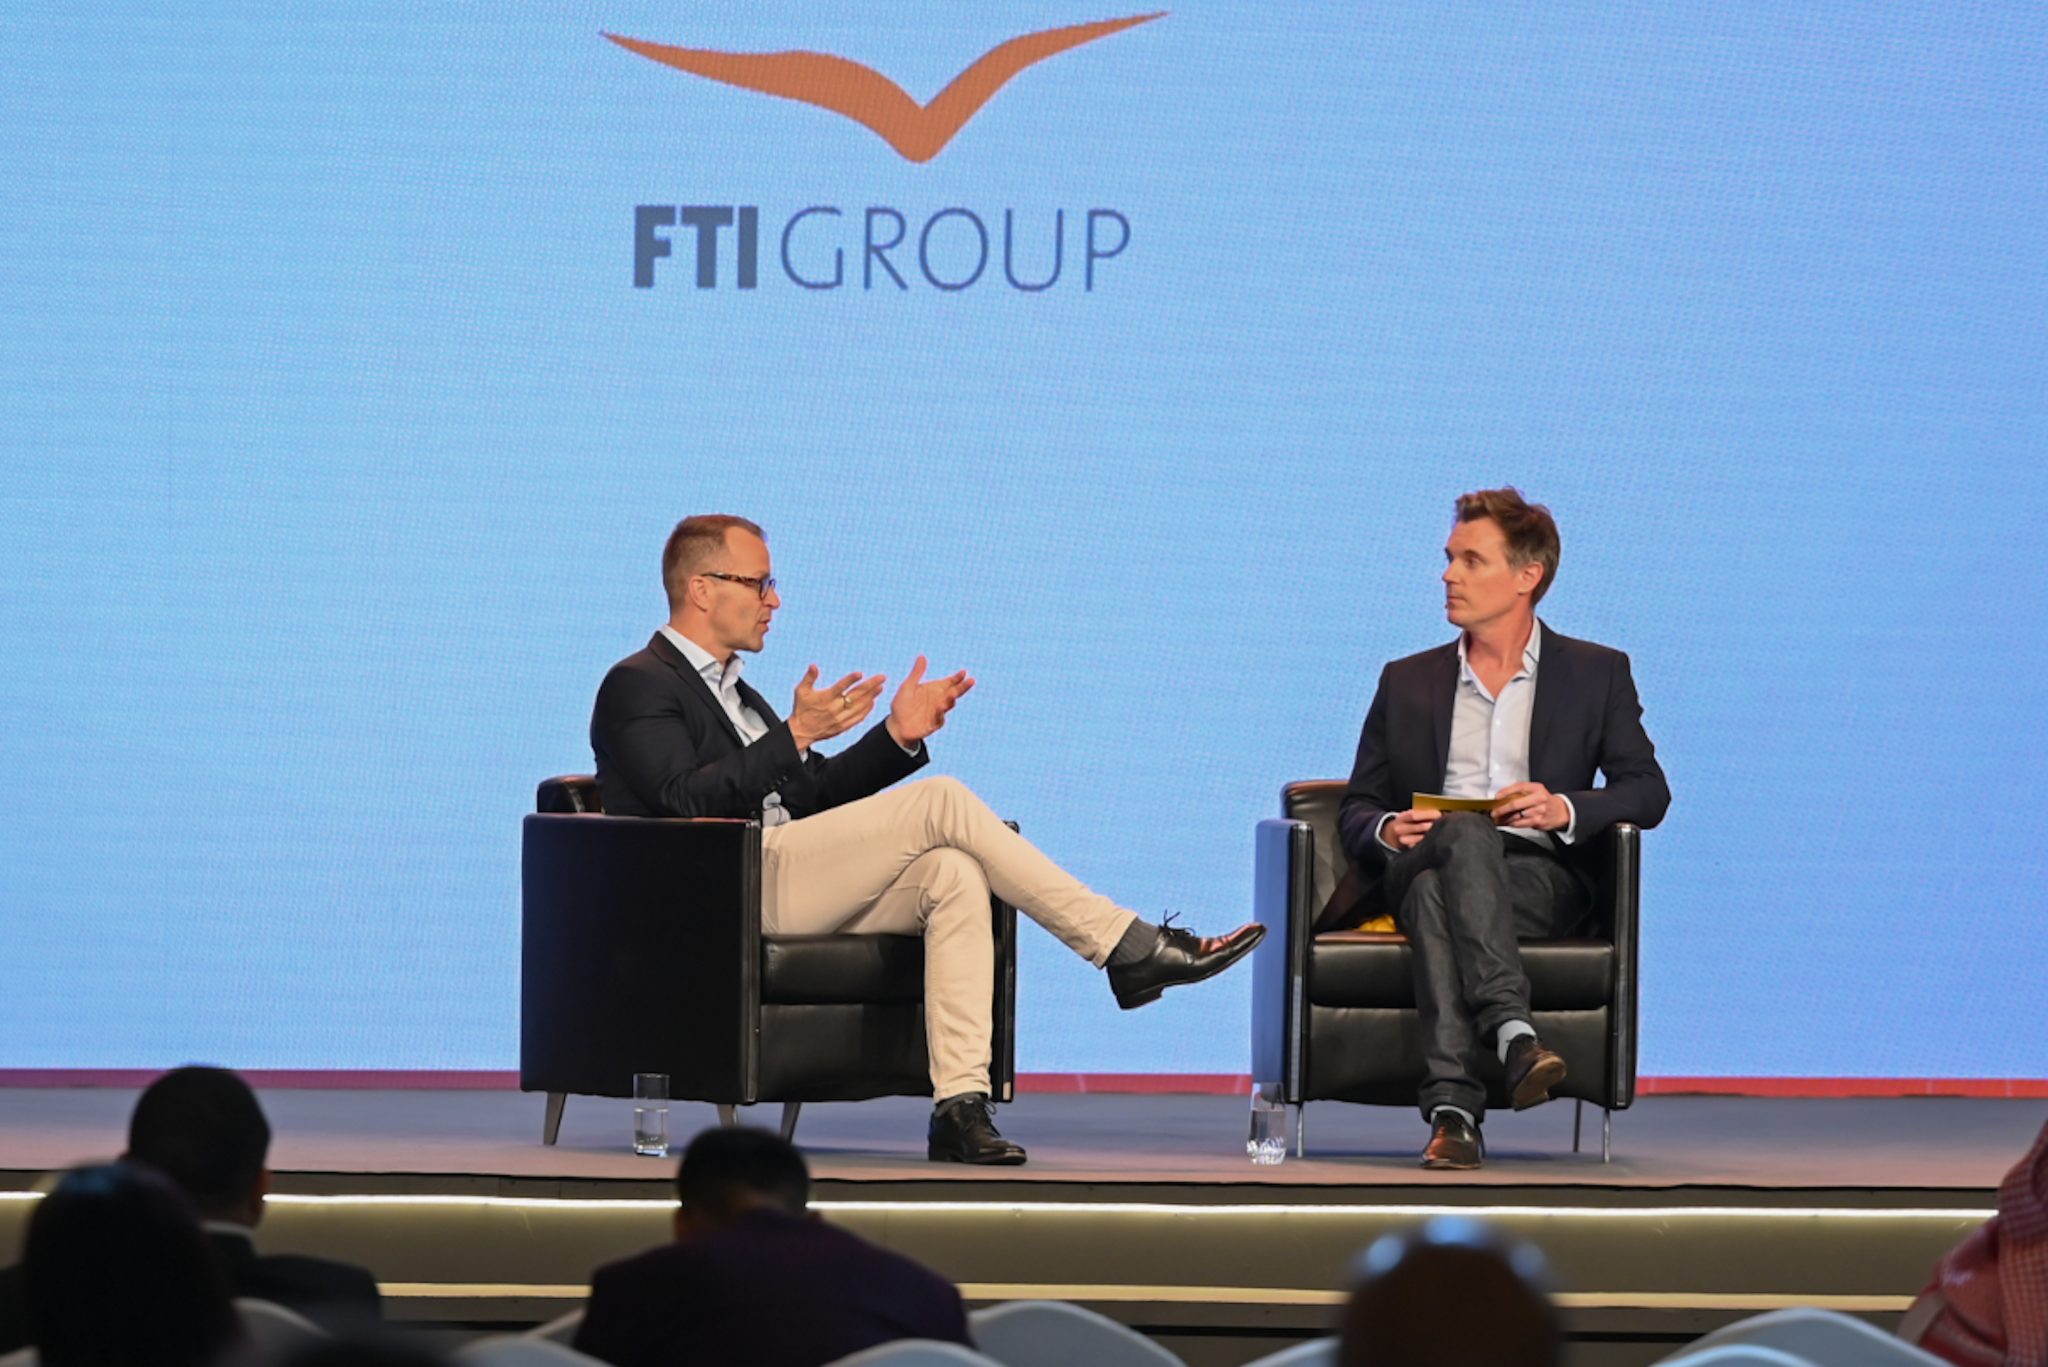 SGFE22 Casper FTI Group skift Casper Urhammer CEO of tour operator FTI Group on stage with Skift Corporate Travel Editor Matthew Parsons at Skift Global Forum East in Dubai Skift